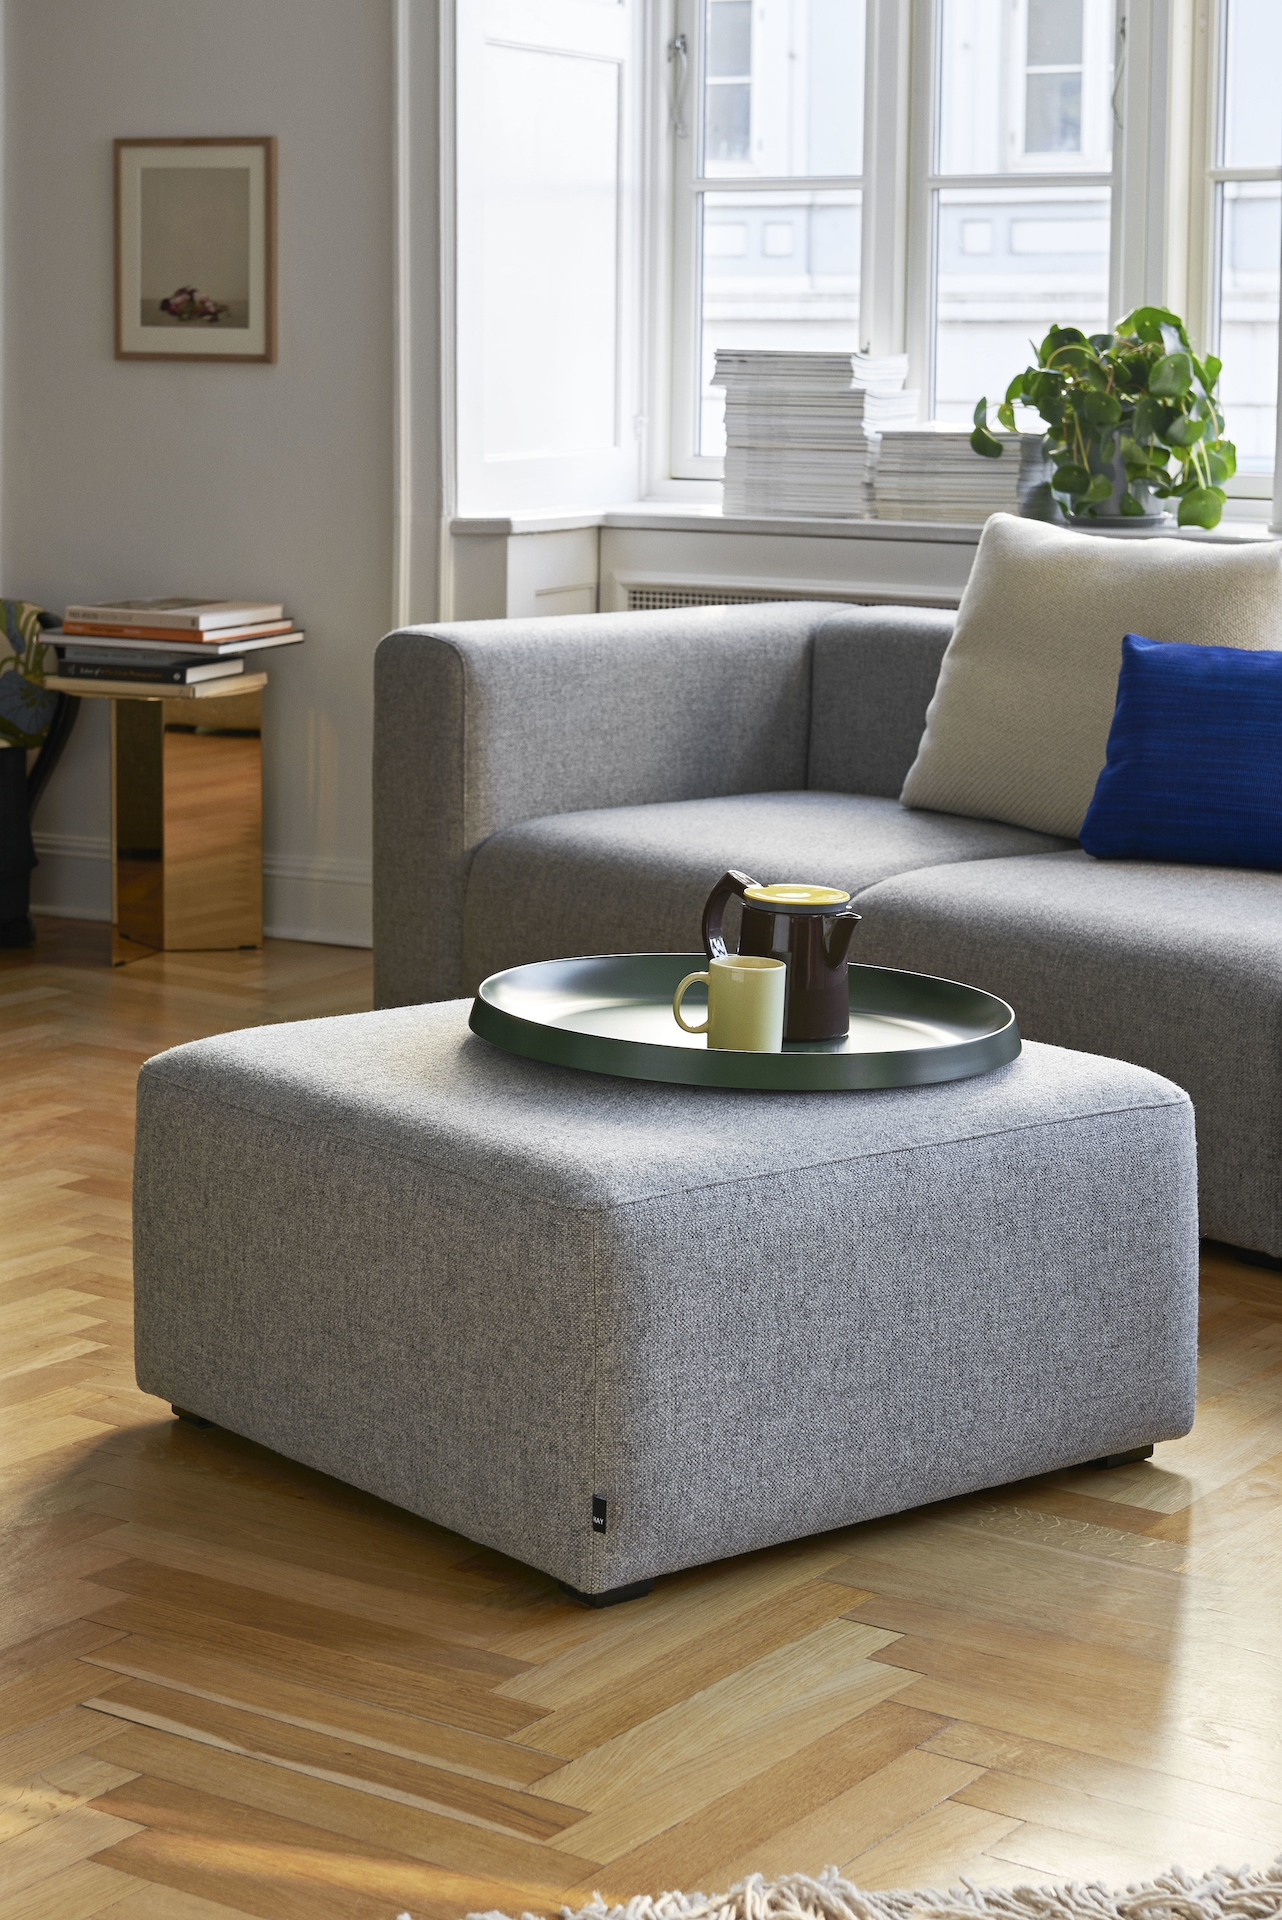 Grey Mags Ottoman, viewed at an angle in front of a grey Mags Sectional Sofa.